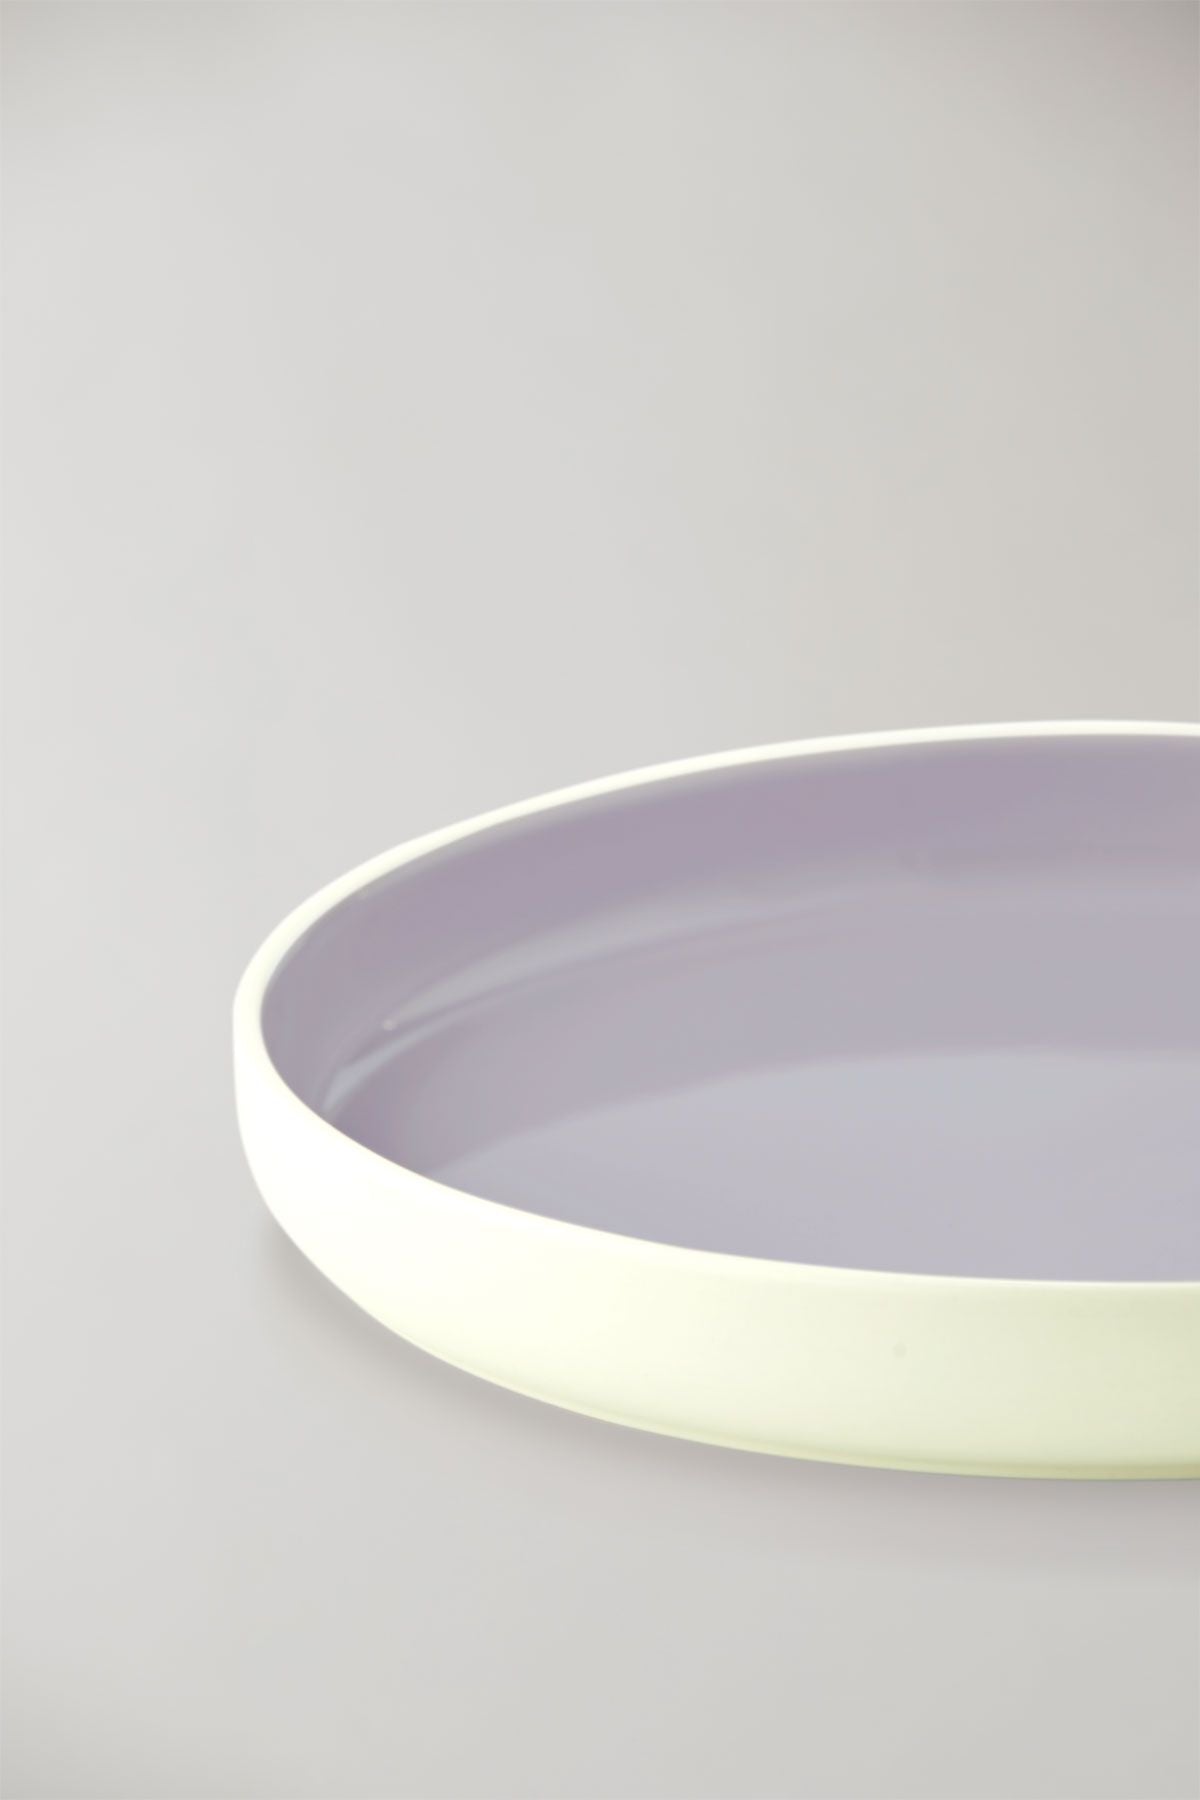 Studio About Clayware Serving Dish, Ivory/Light Purple